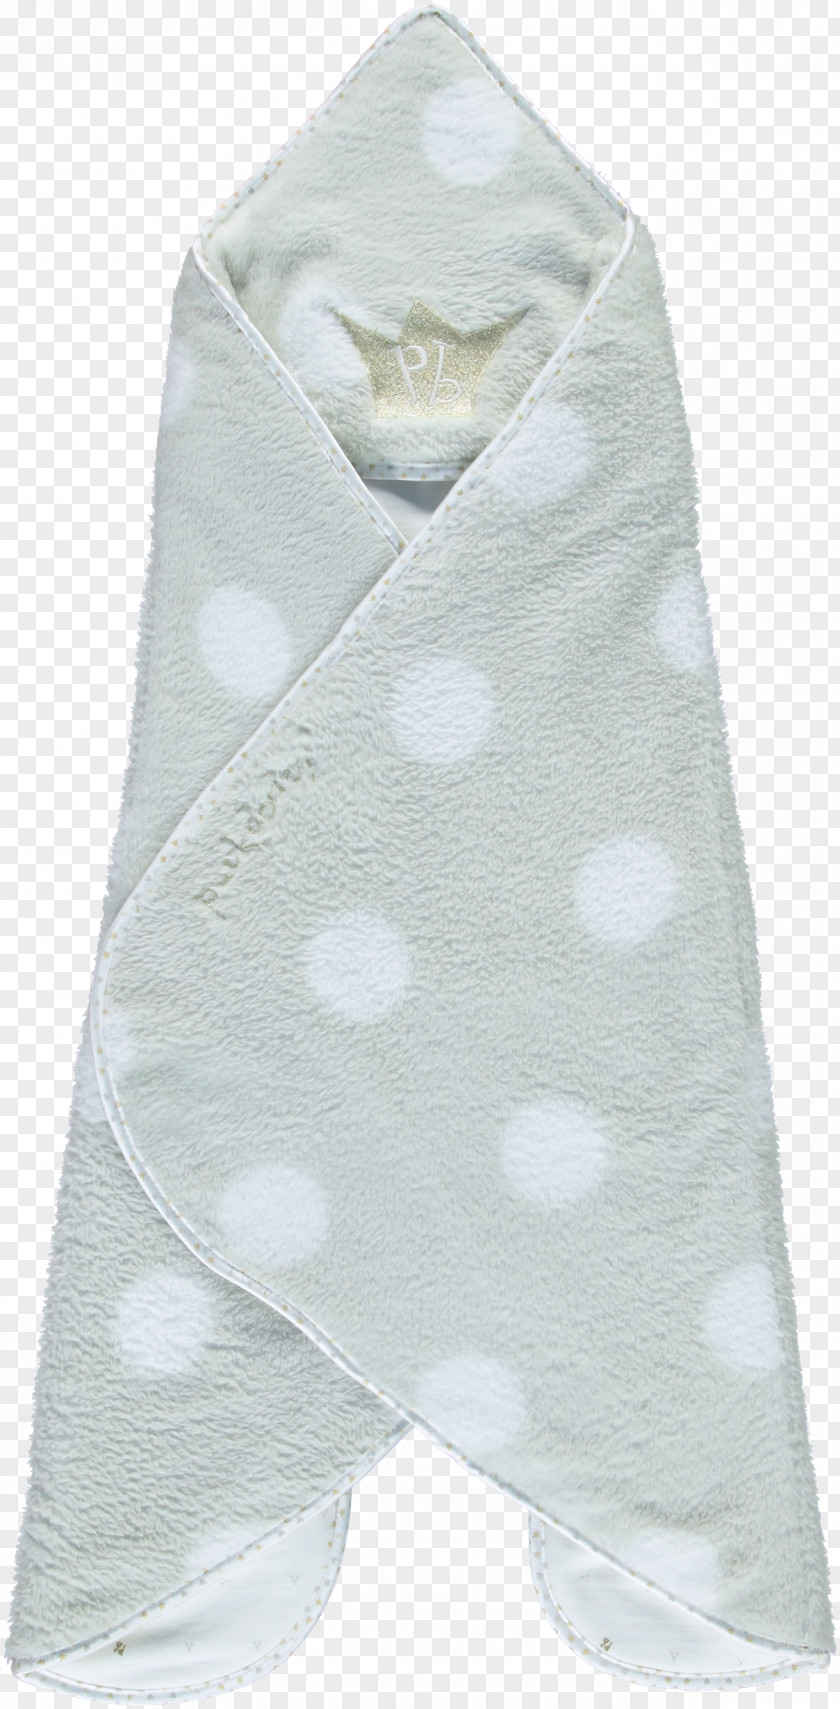 Gold Dot Puckababy Gogo New-born Teddy Wrapping Blanket Infant The Bag Newborn Sleeping White Dotty Bags PNG